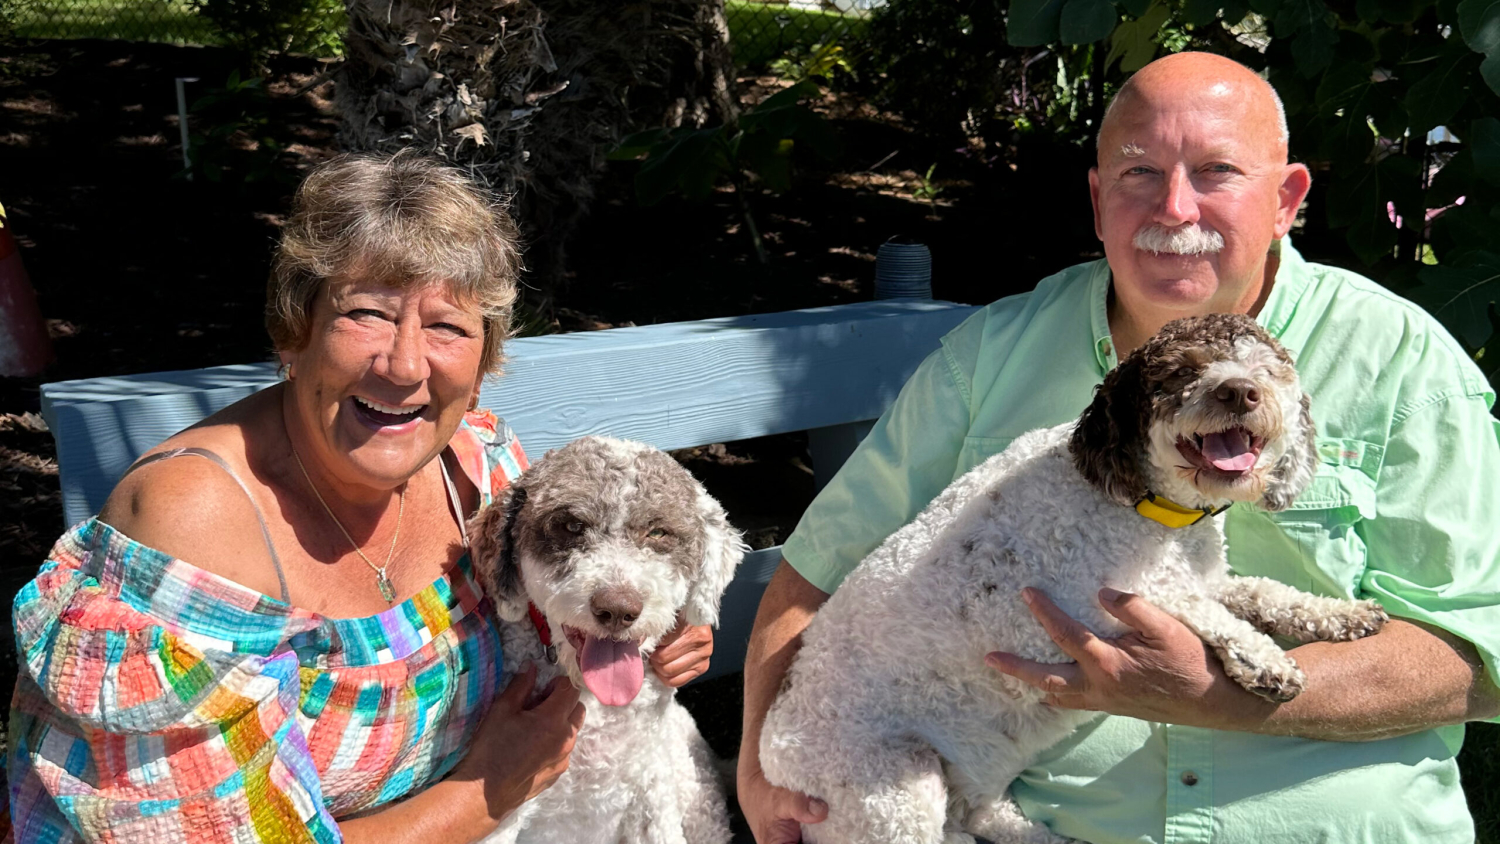 Dr. Jackie Jaloszynski, left, sits with her Lagotto Romagnolo puppy in her lap. Her husband, Sid Bragg, is sitting at the right with the couple's other Lagotto Romagnolo puppy in his lap.